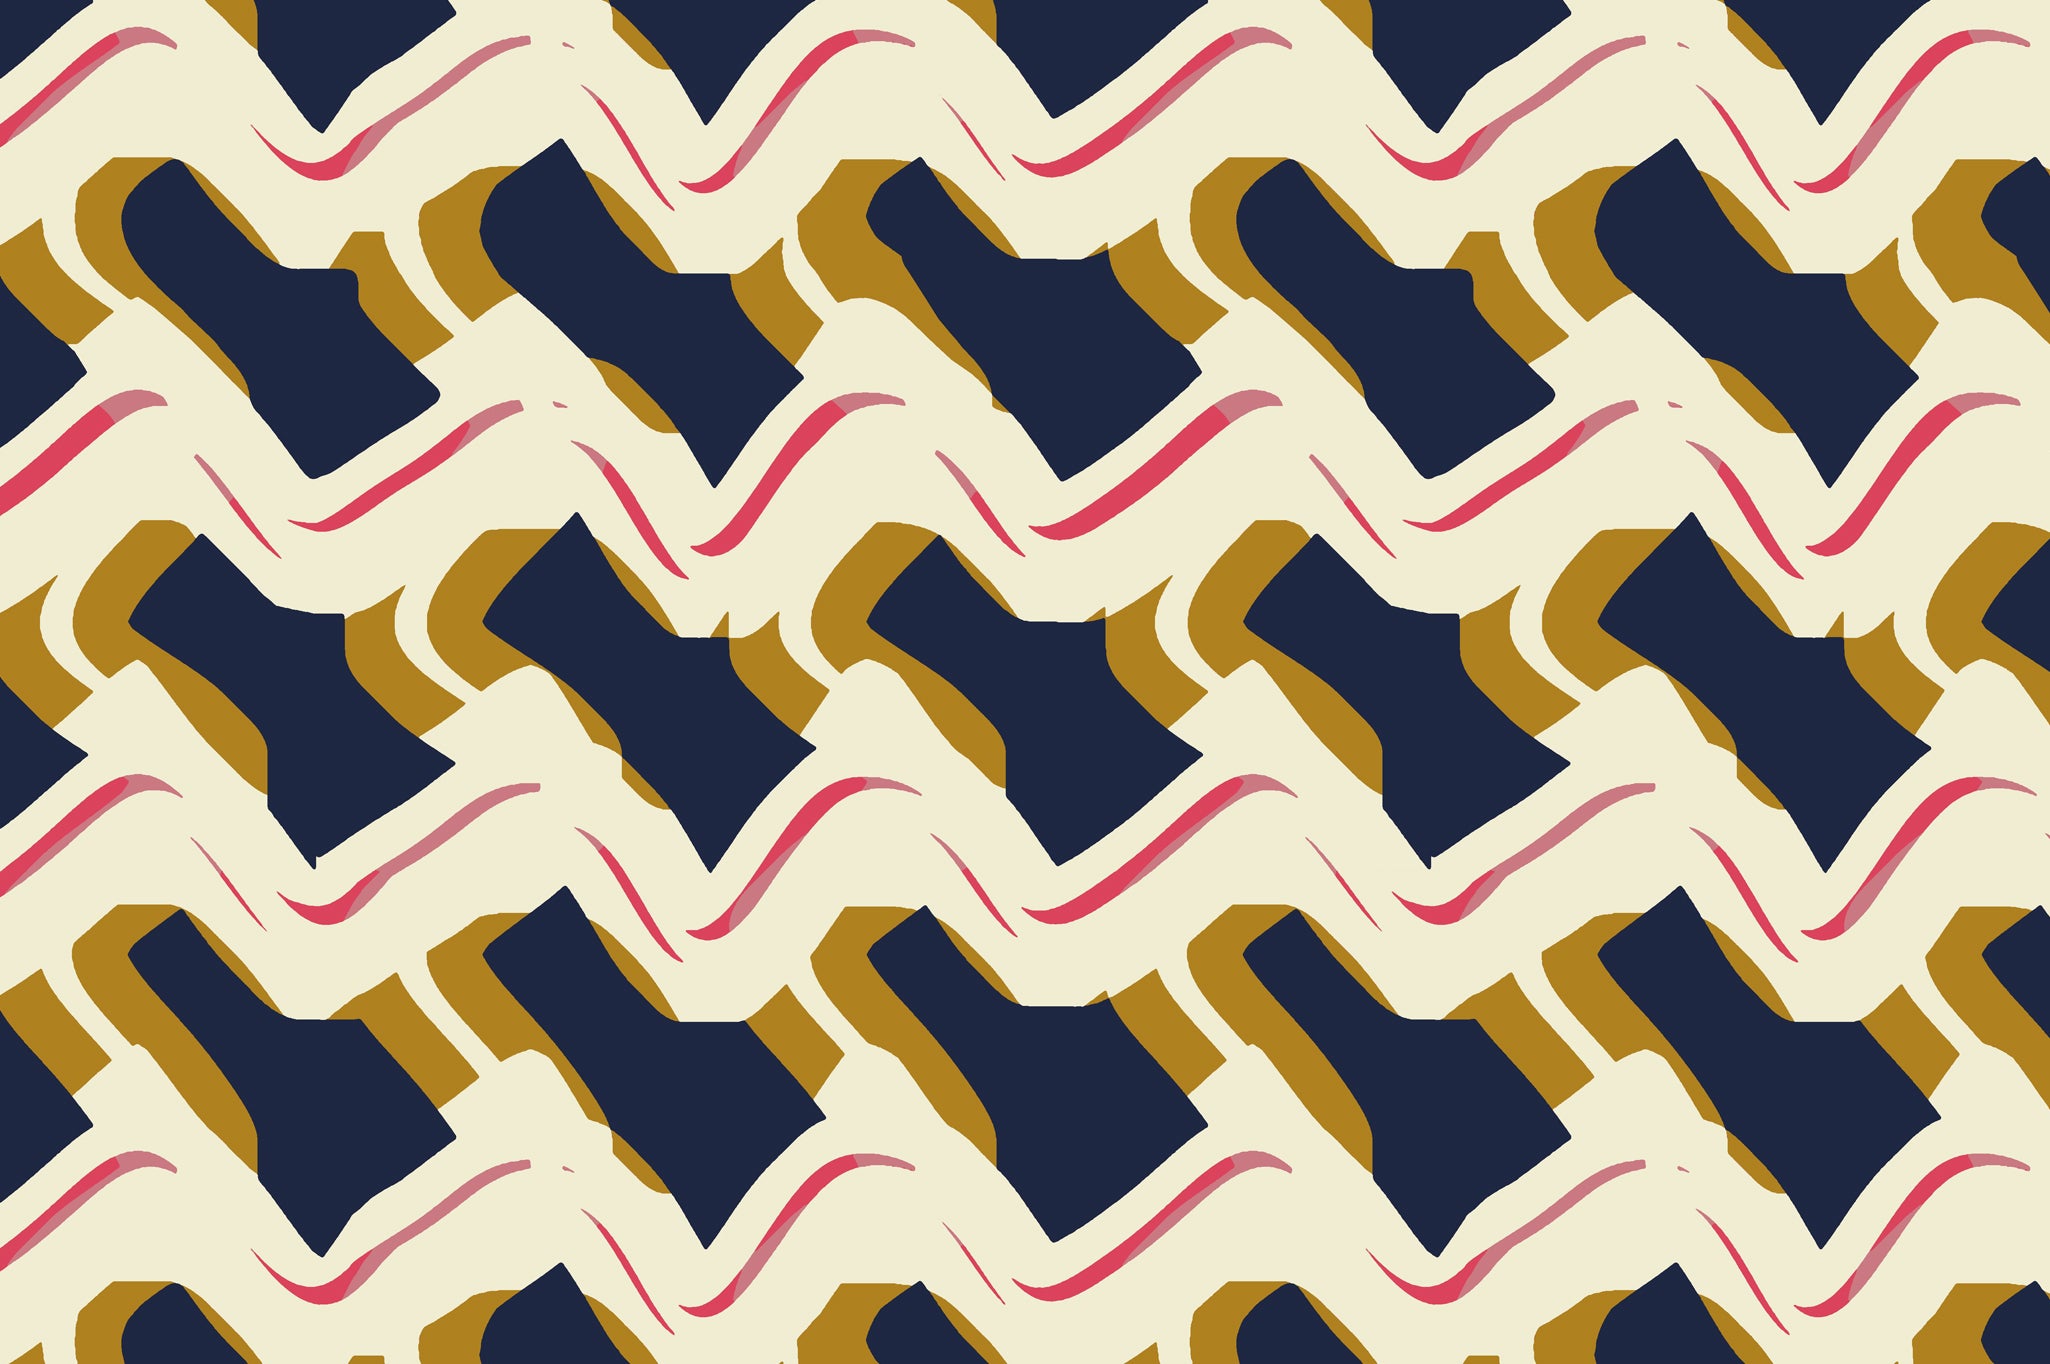 Detail of fabric in an abstract shape print in shades of mustard, gray, pink and cream.